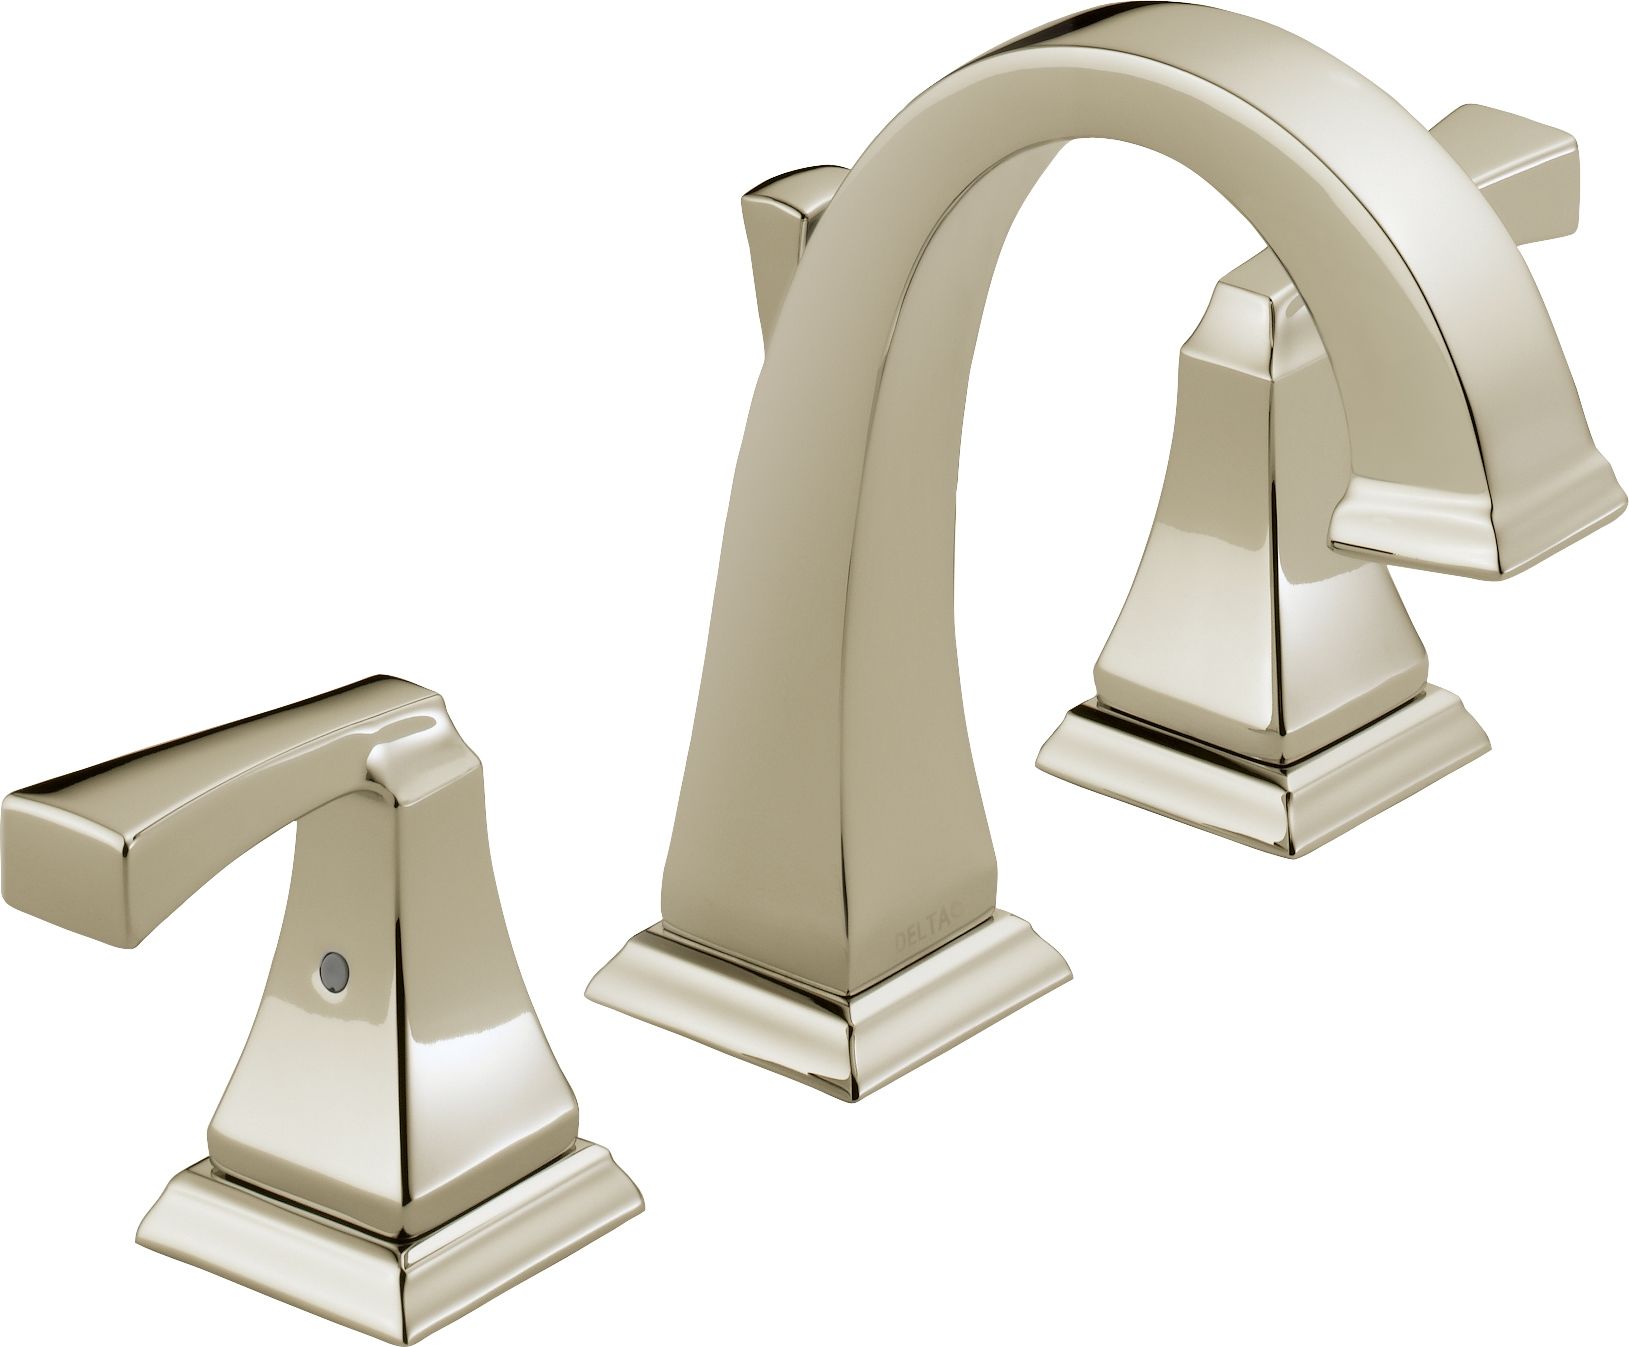 Bathroom Sink Faucets at FaucetDirect